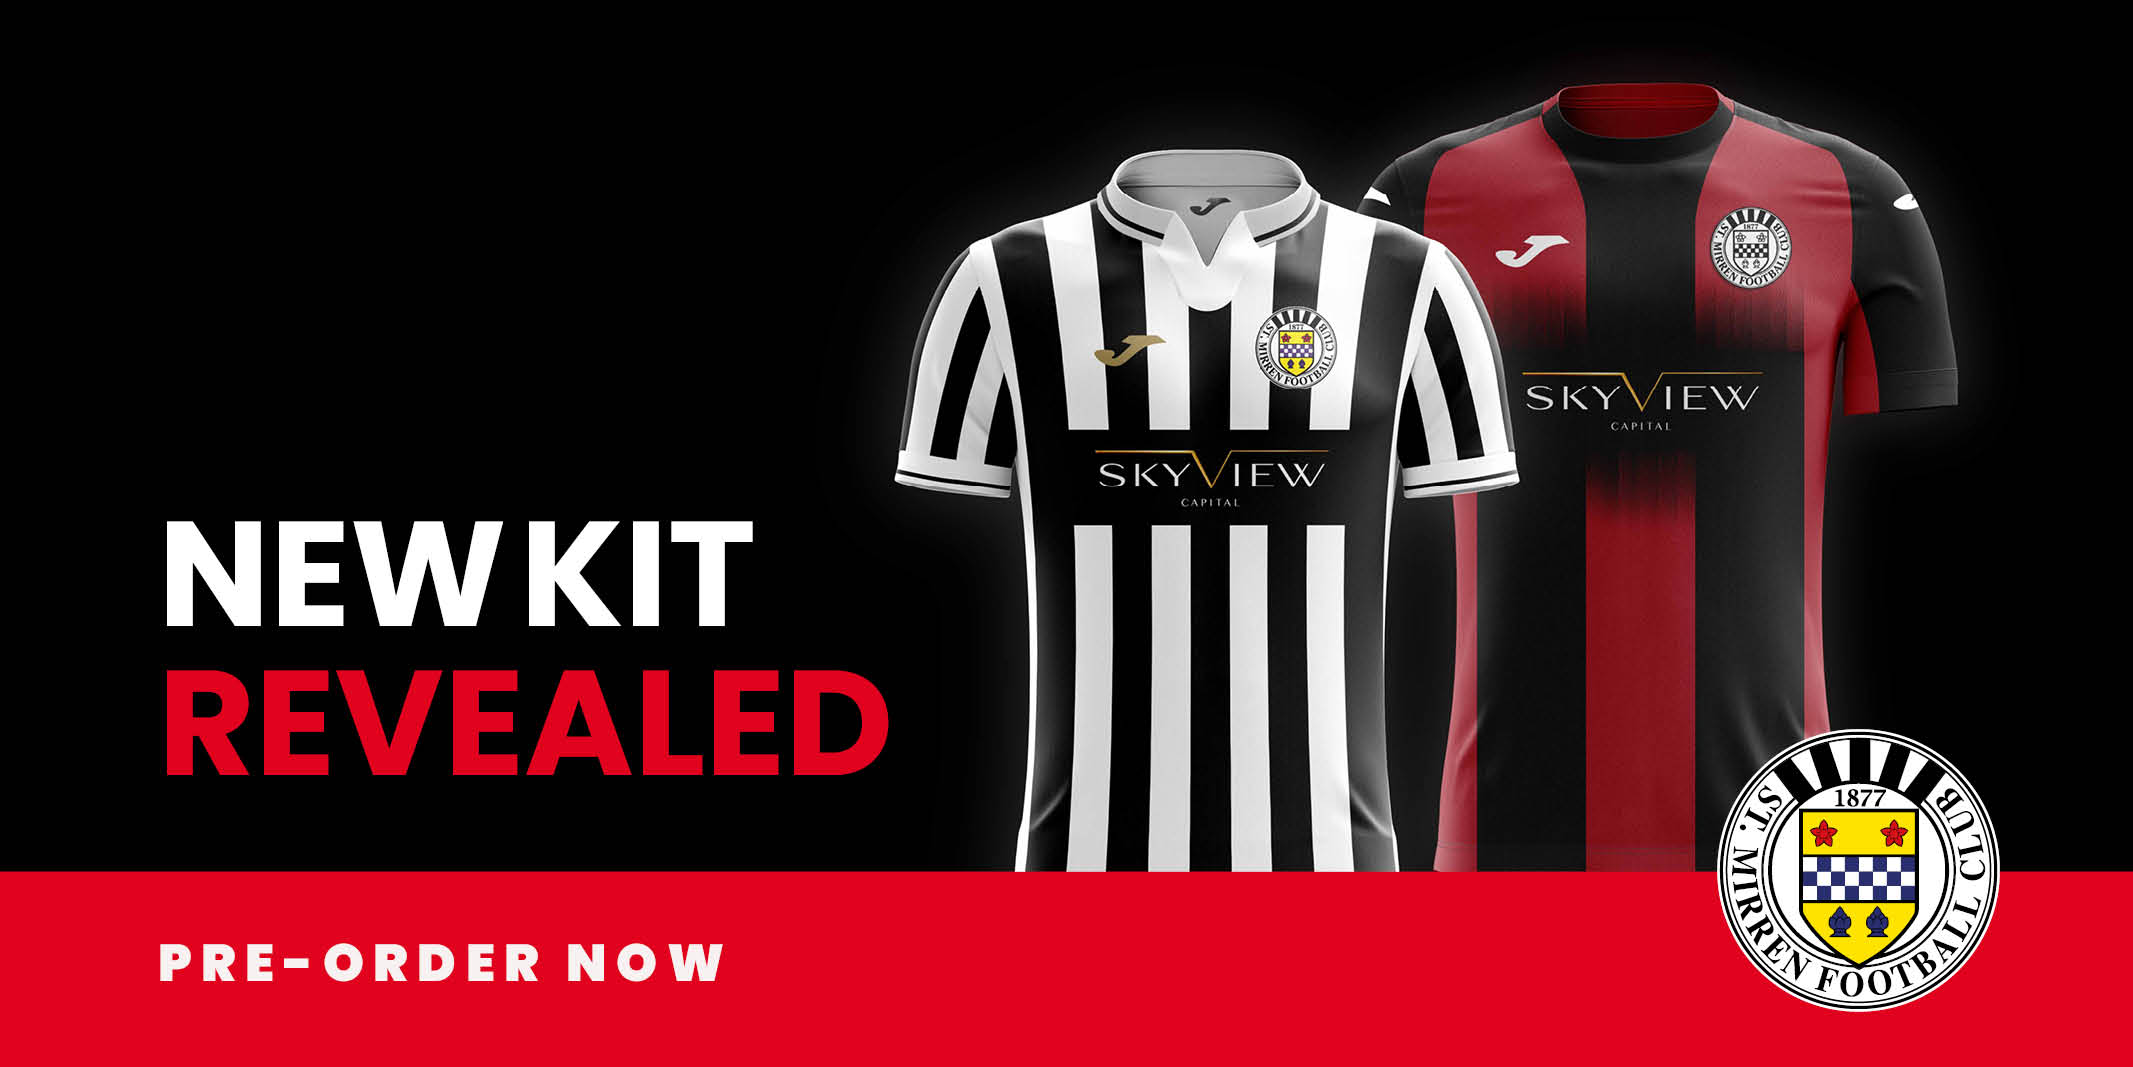 St Mirren 2020/21 home and away kits 